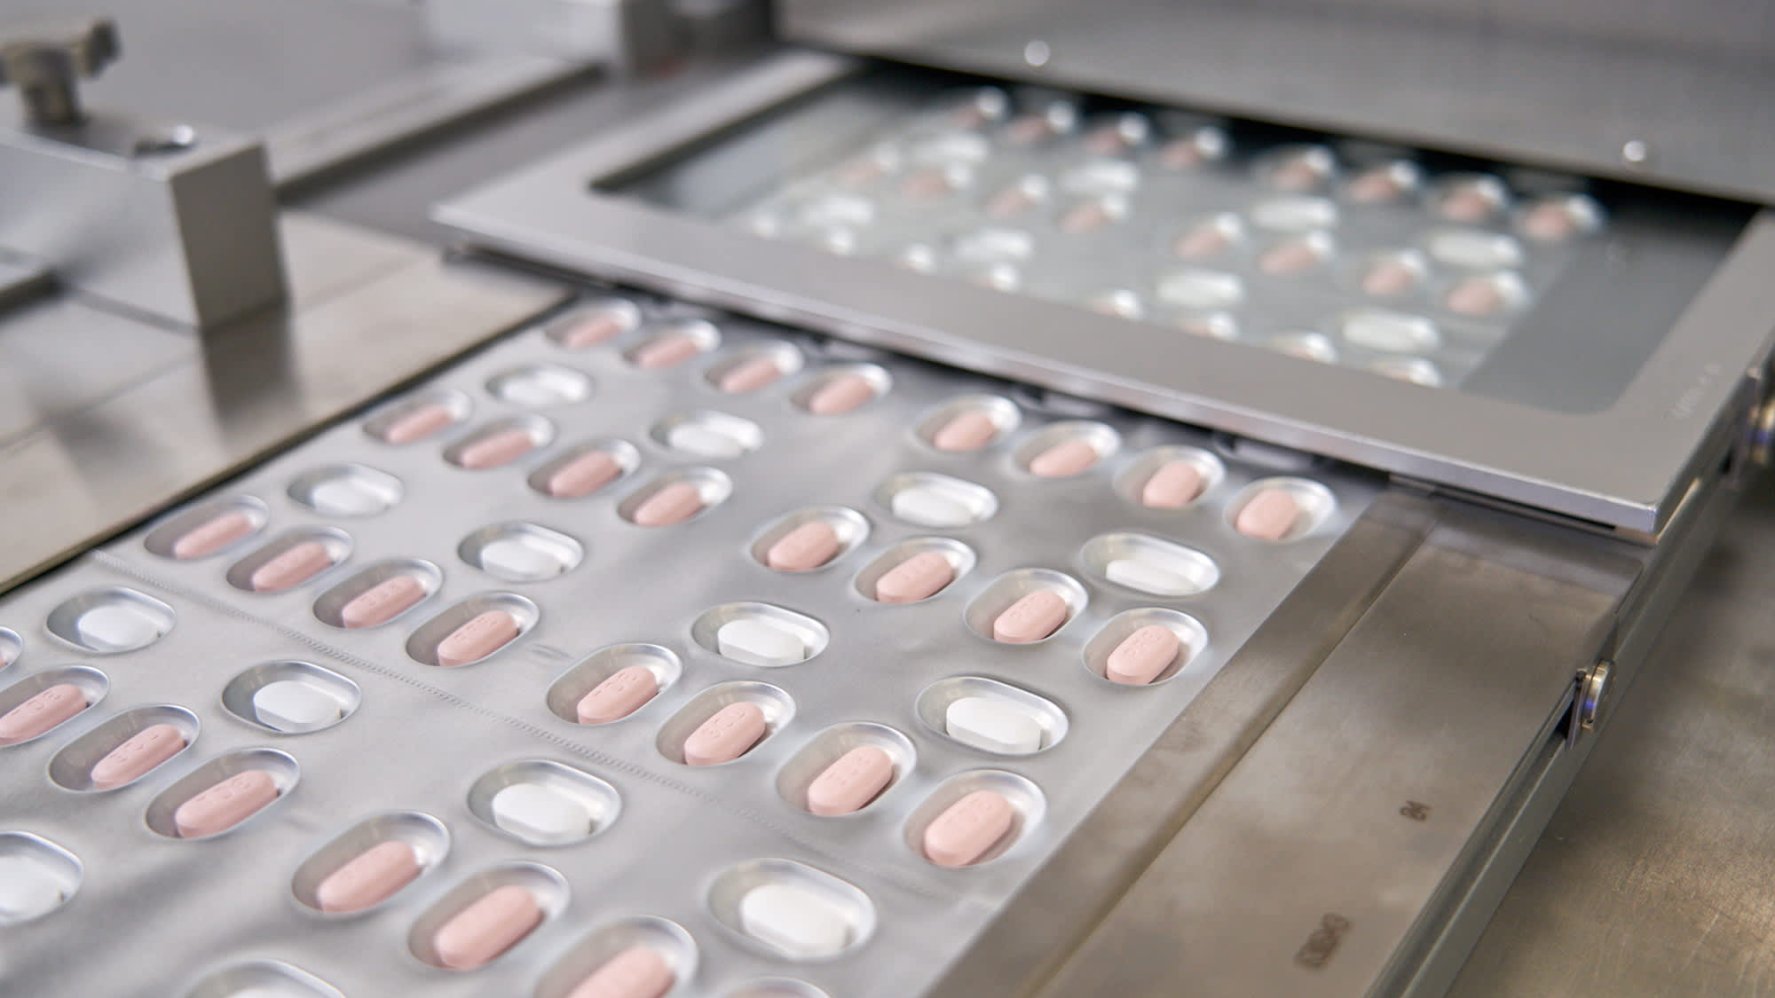 Biden Administration Buys 10 Million Courses of Pfizer Covid Treatment Pill in $5 Billion Deal